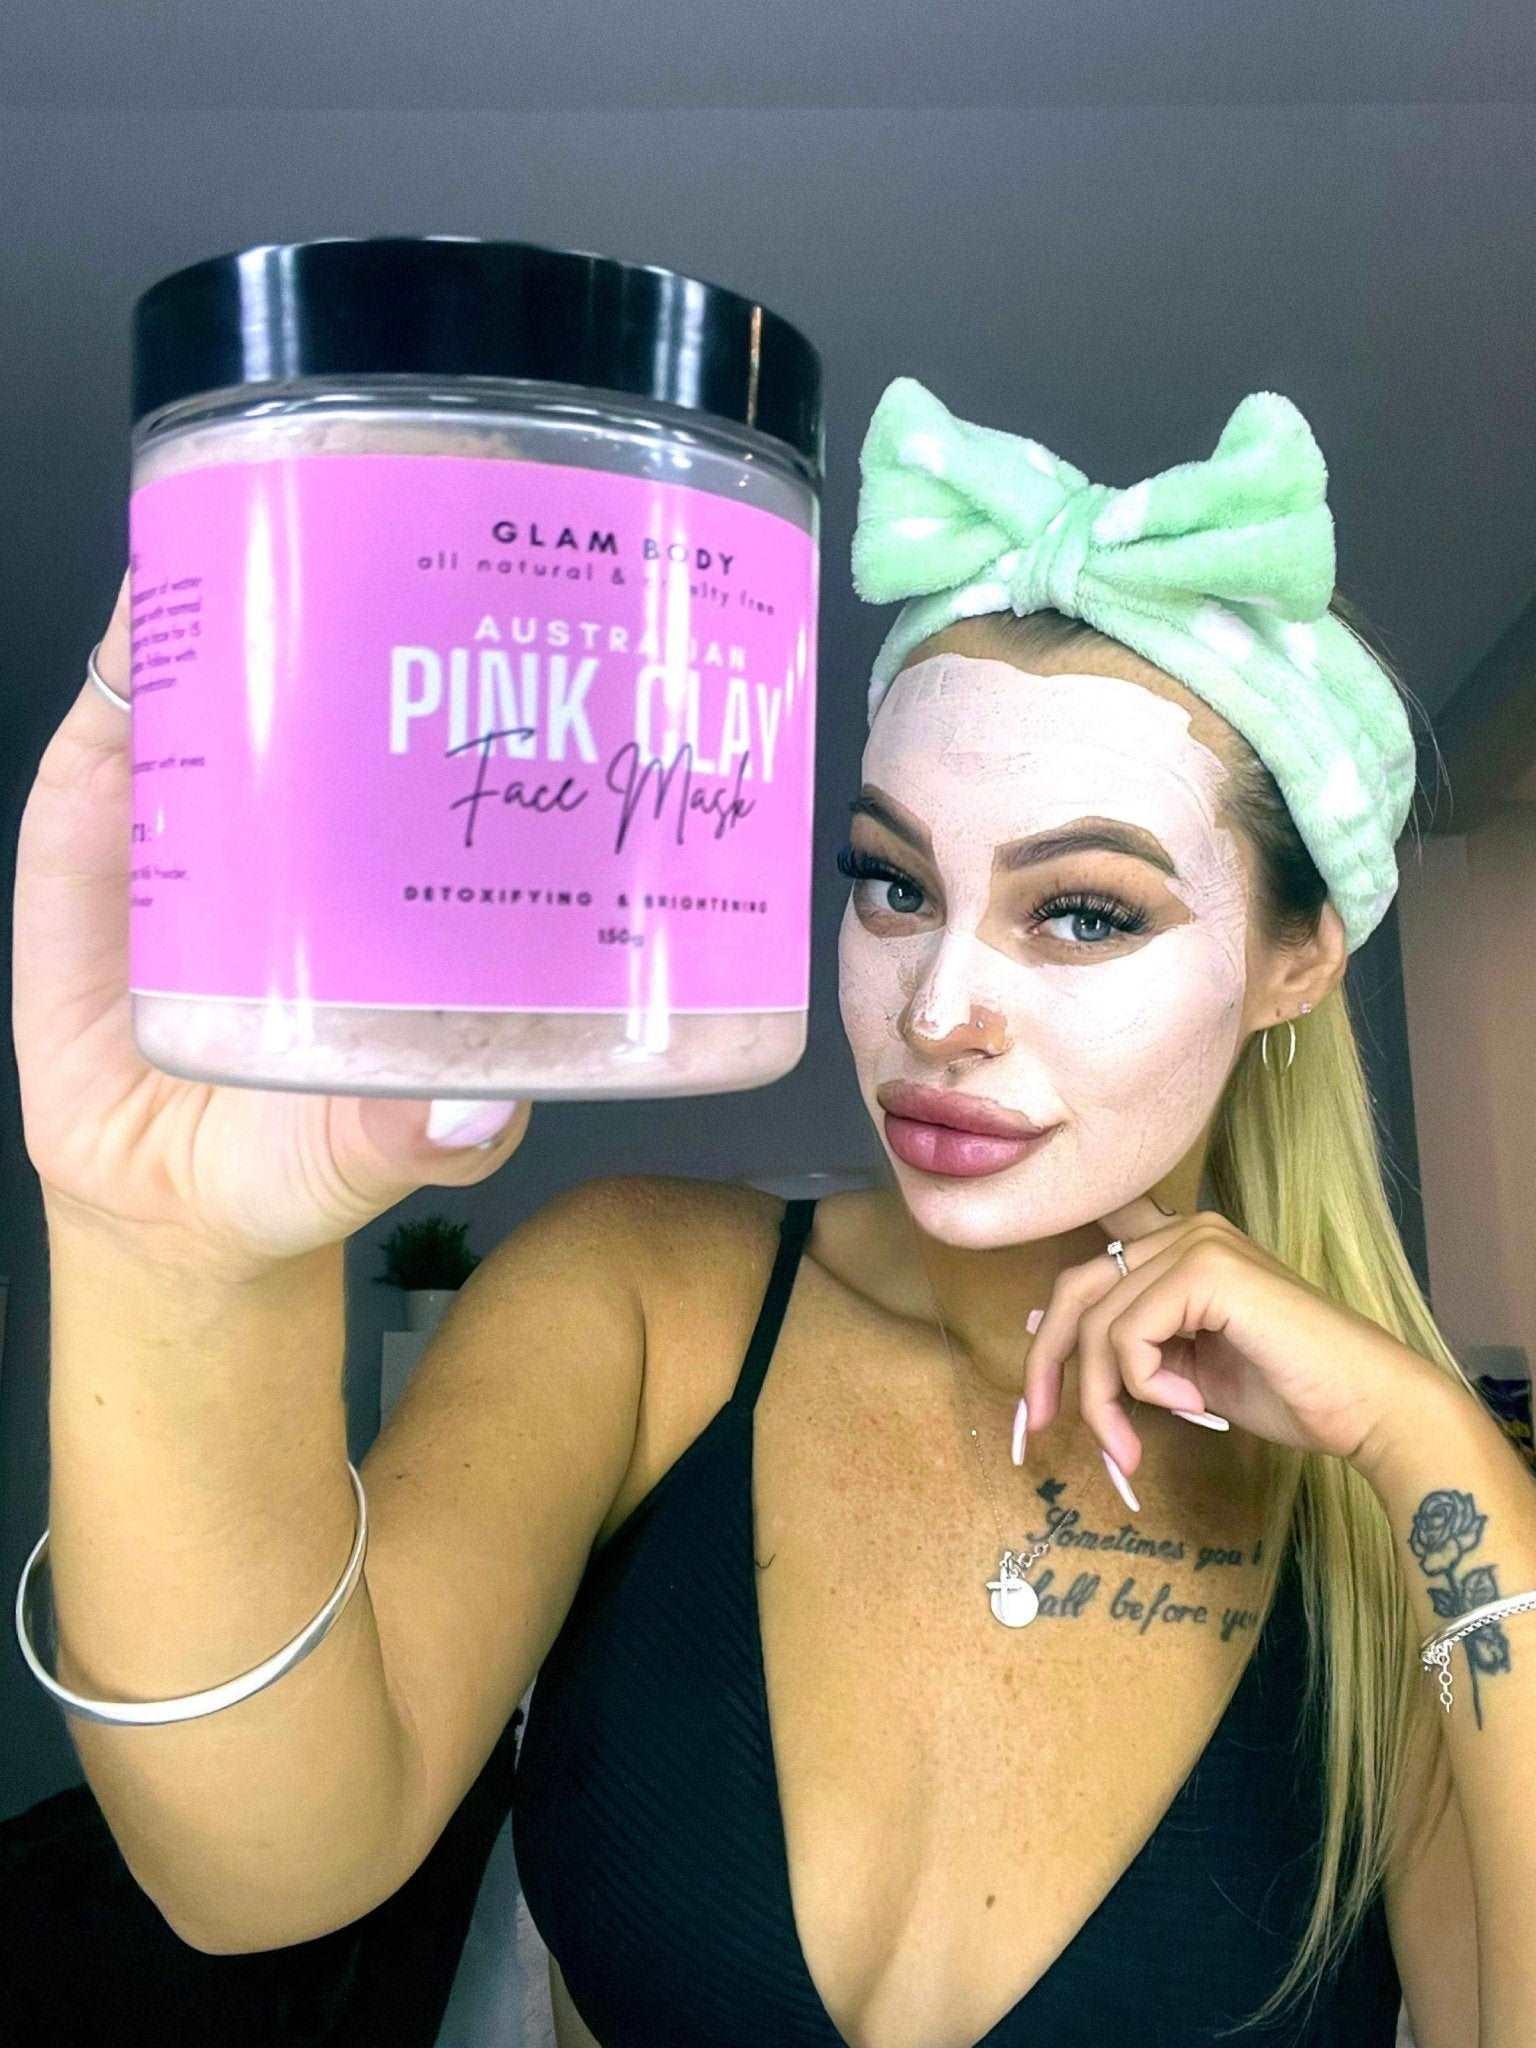 PINK CLAY FACE MASK - Glam Body